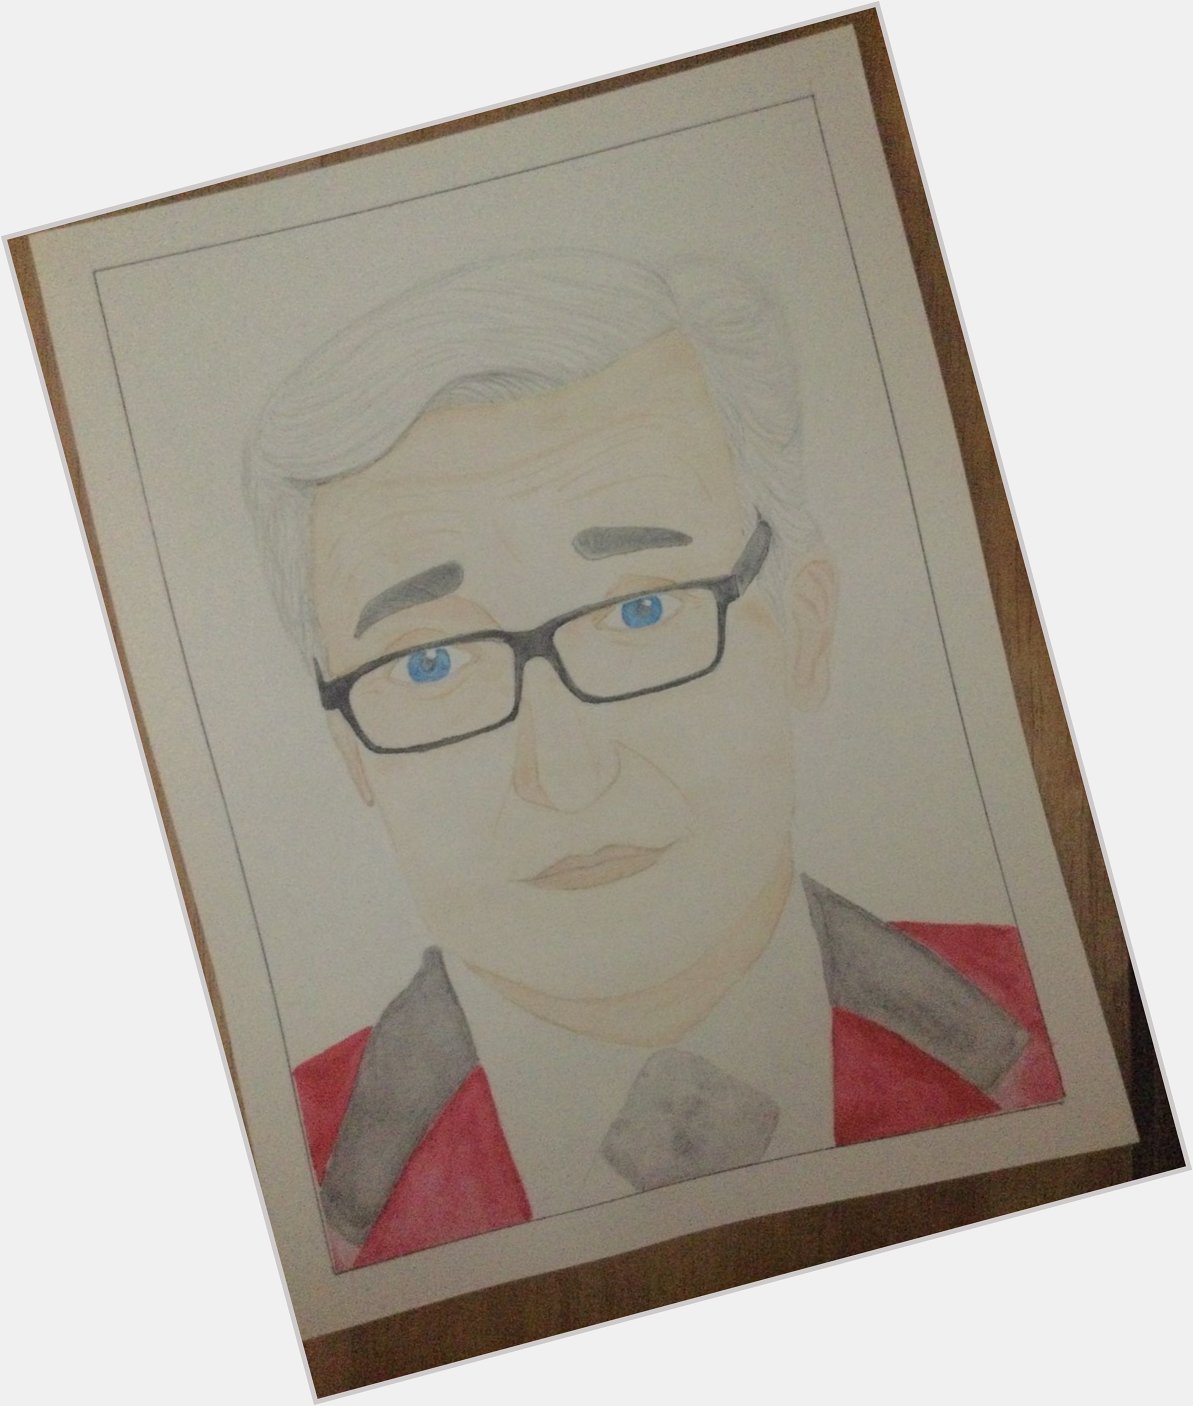 I decided to paint Paul Feig because it s his birthday (ik it s not that good ) but happy birthday!!!   